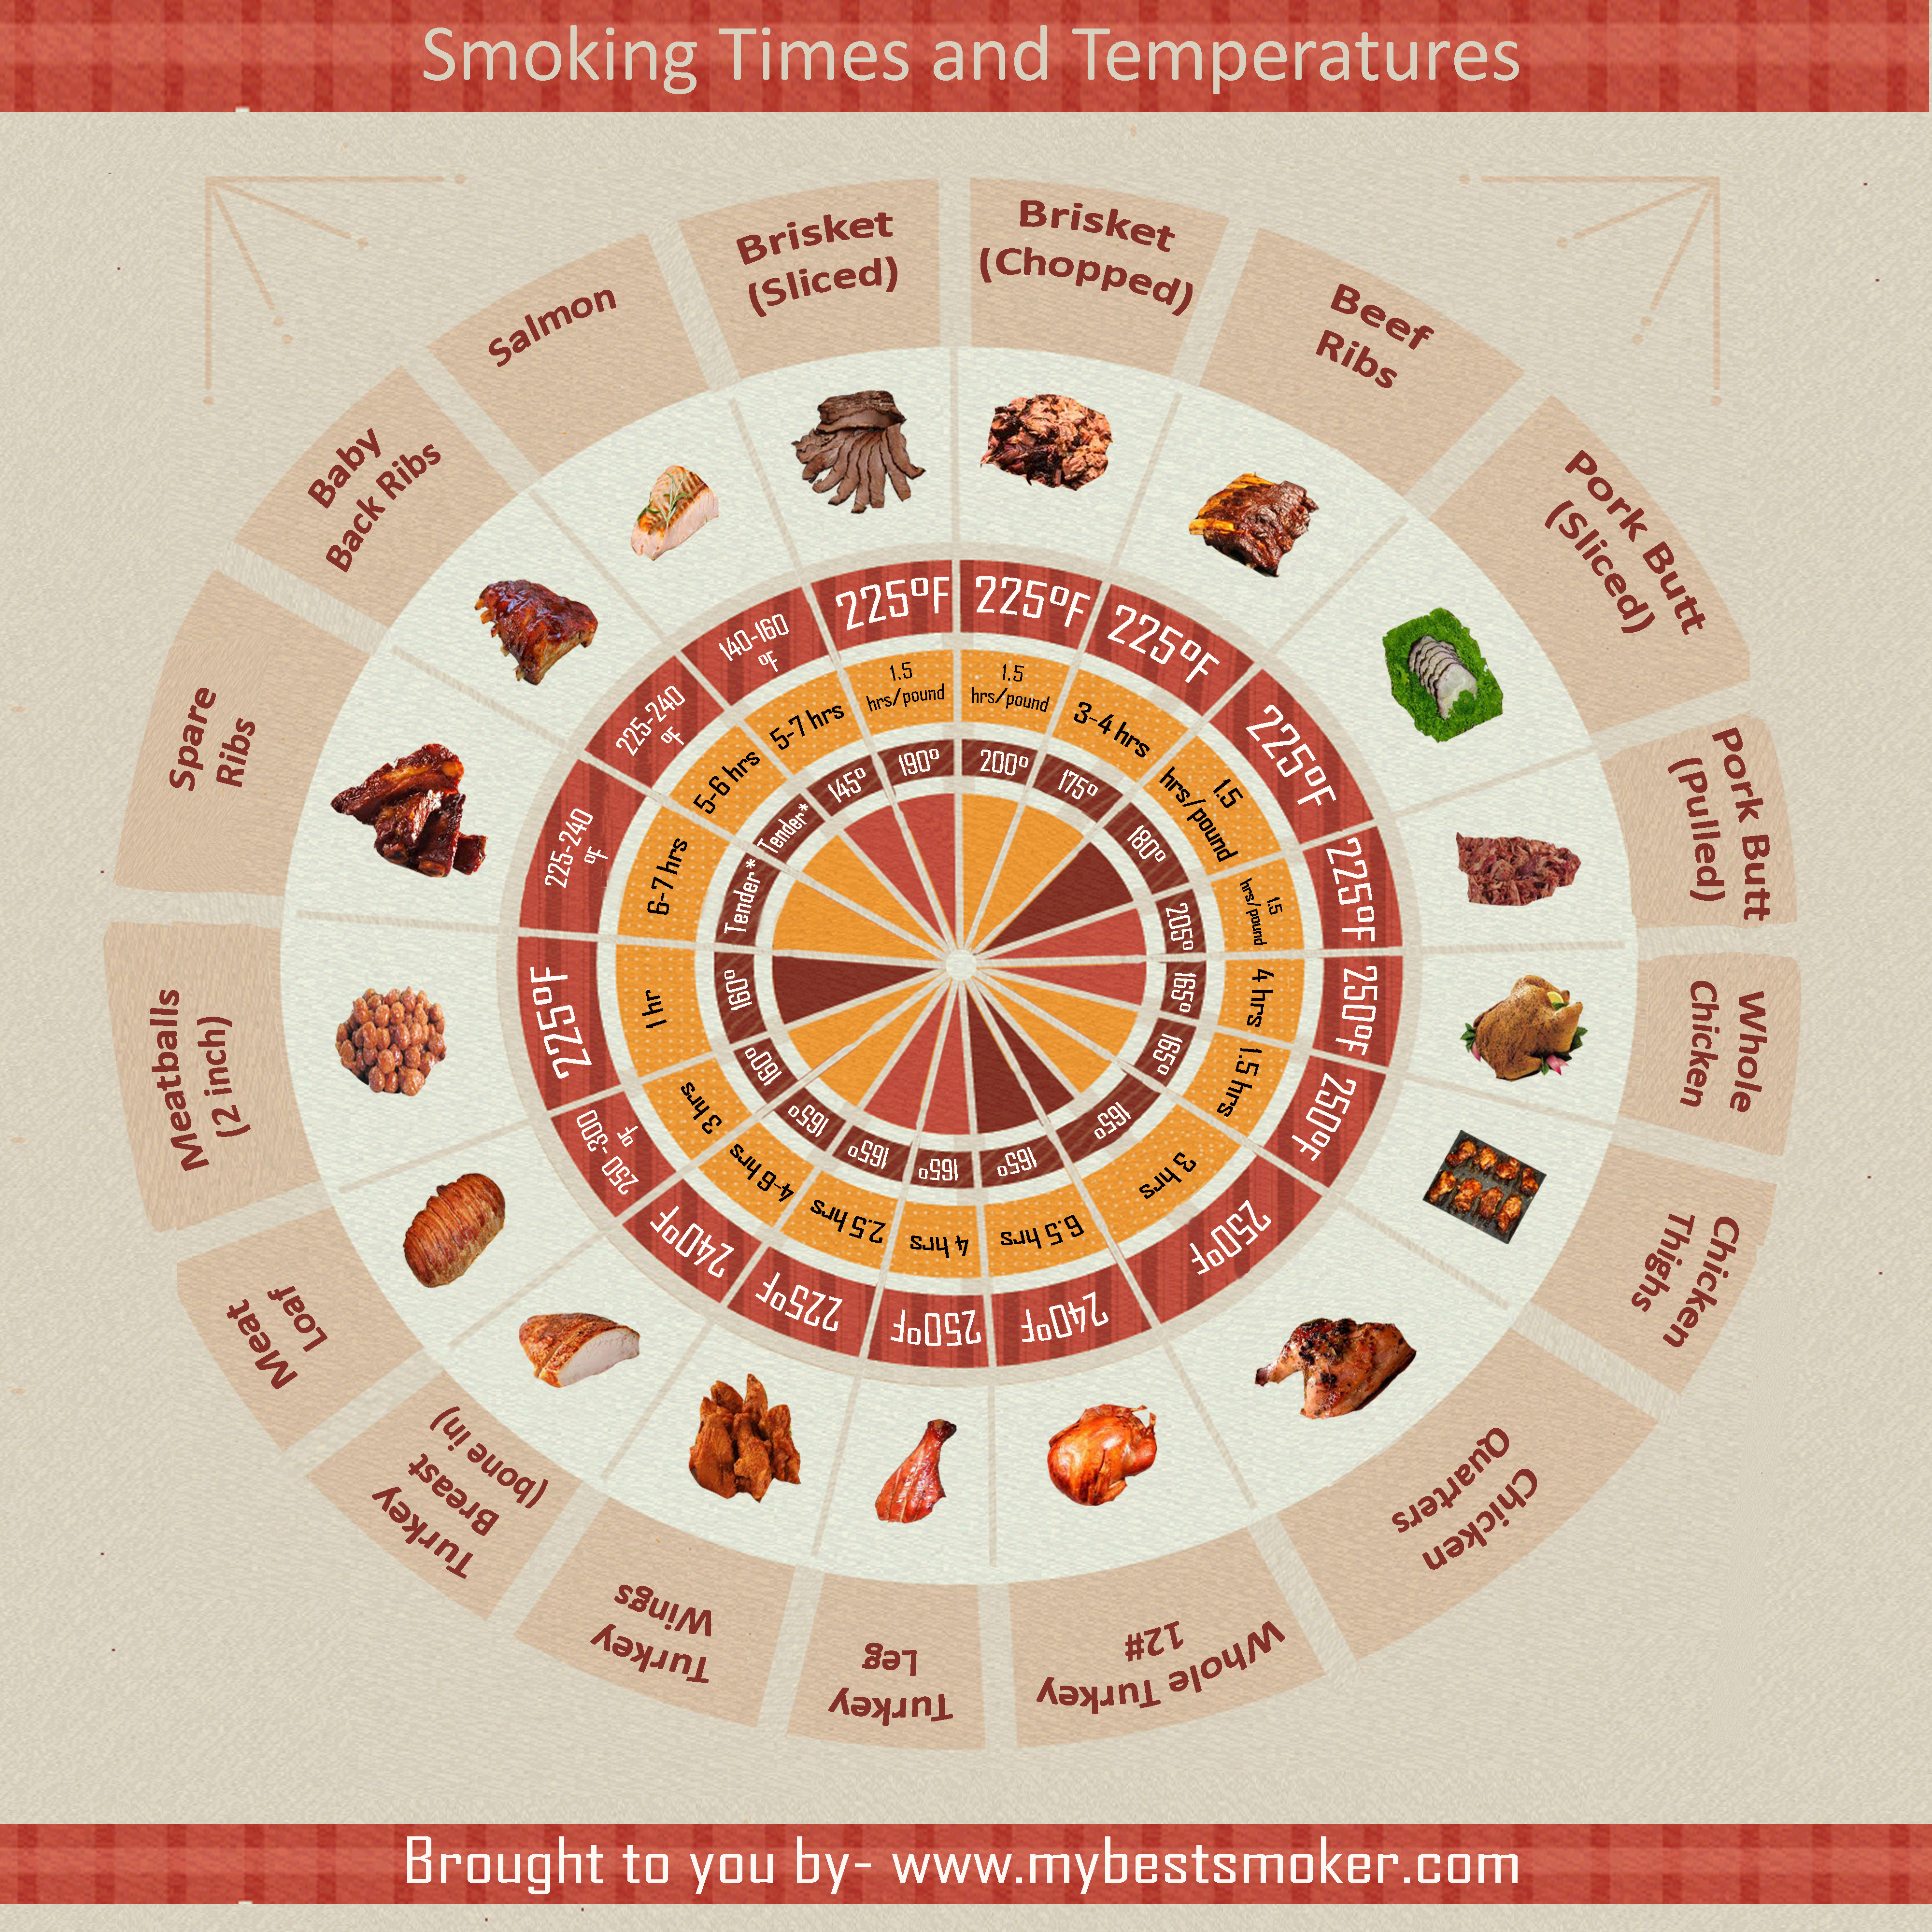 https://i.visual.ly/images/smoking-times-and-temperatures_54eb582b5a392.jpg